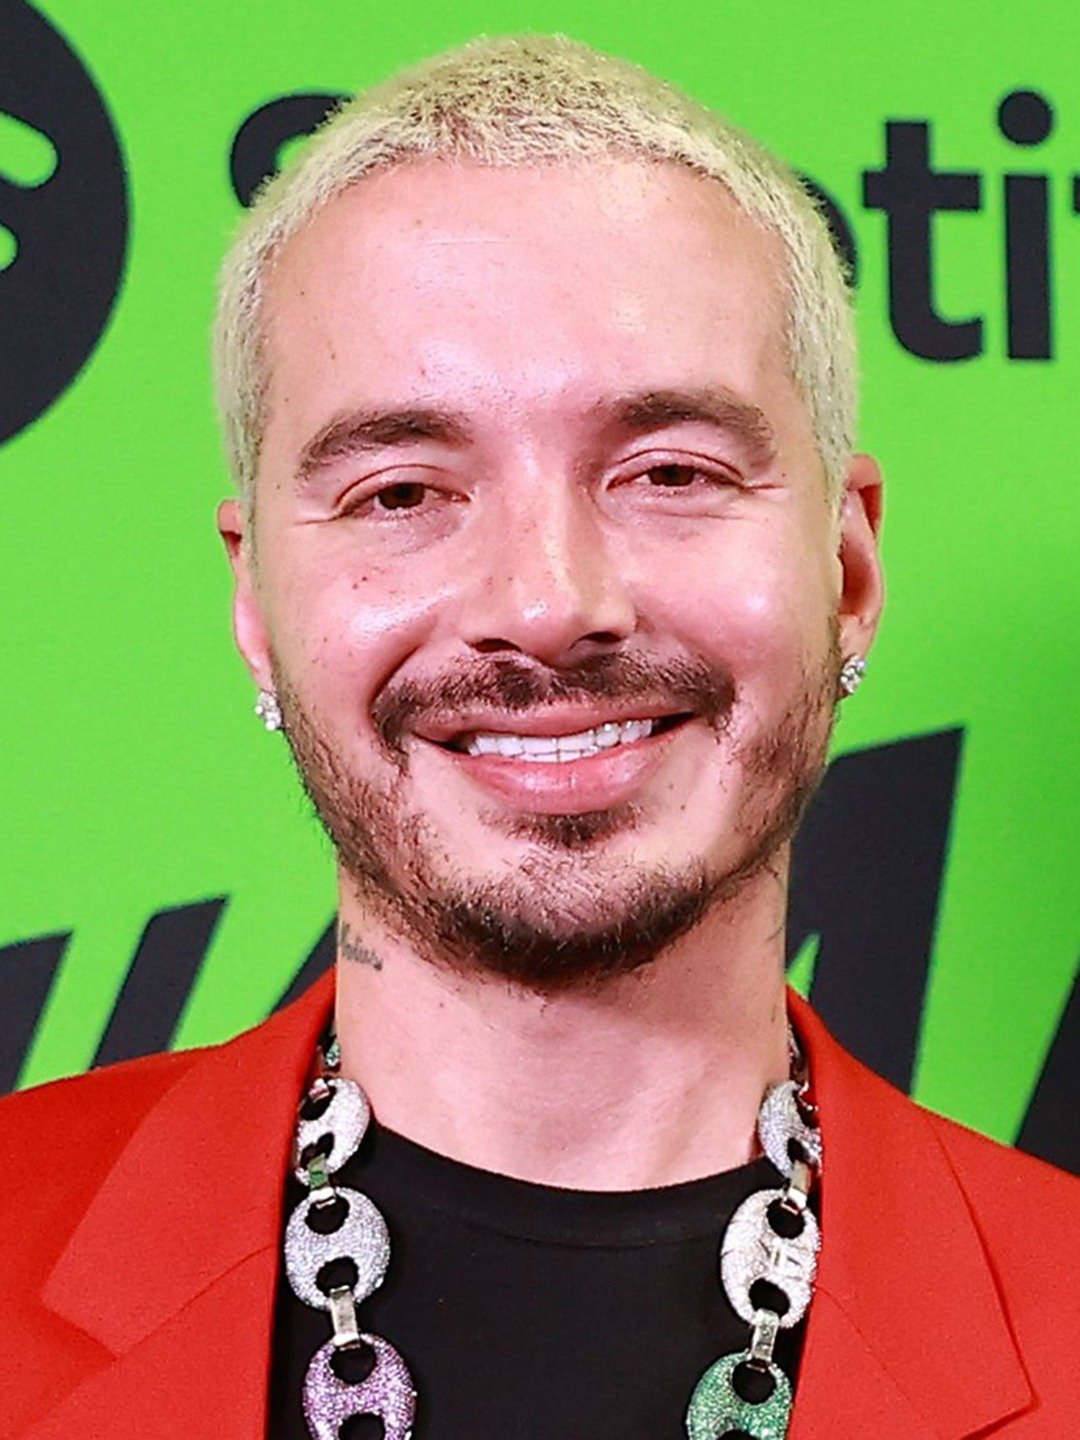 Forthcoming Album – J Balvin Official Store